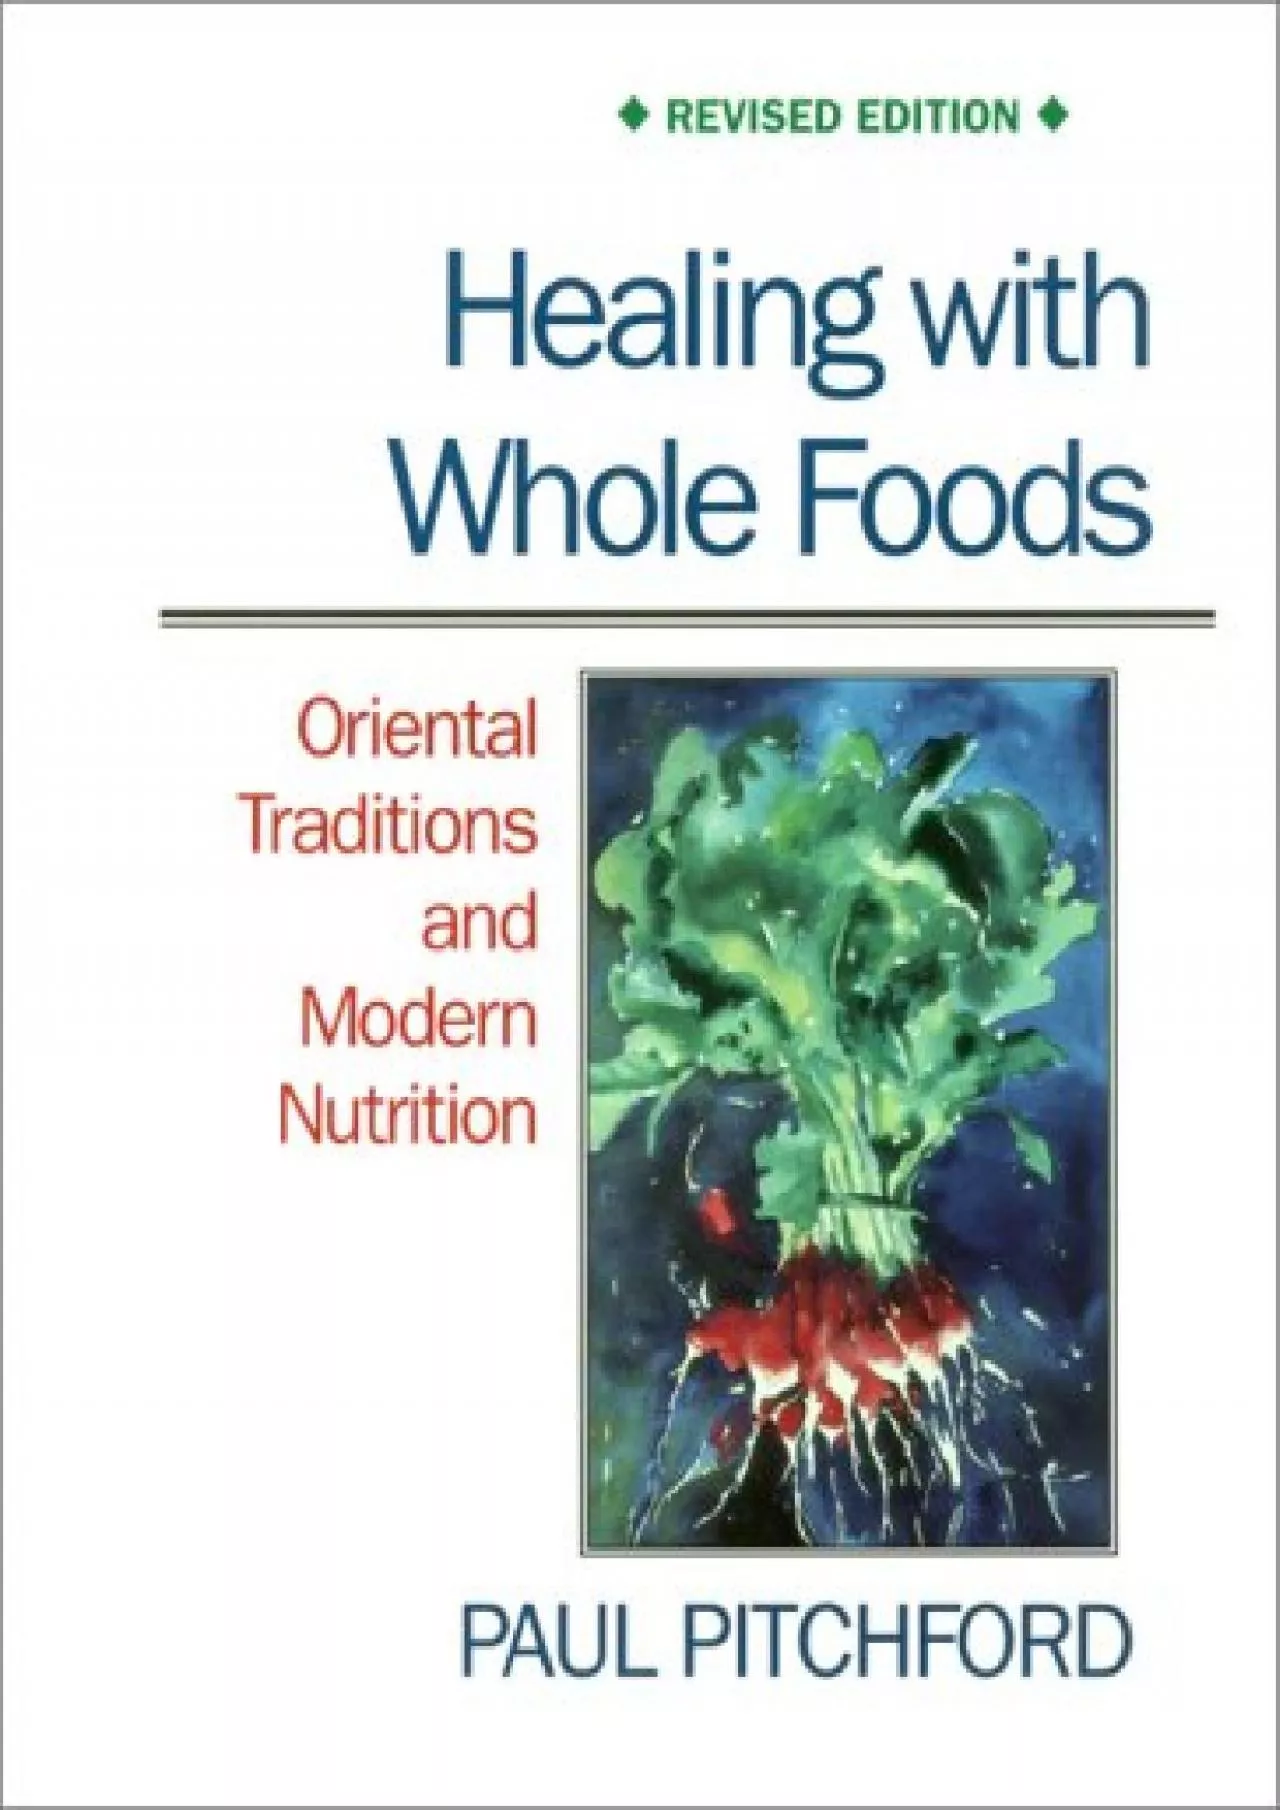 (EBOOK)-Healing with Whole Foods: Oriental Traditions and Modern Nutrition (Revised)